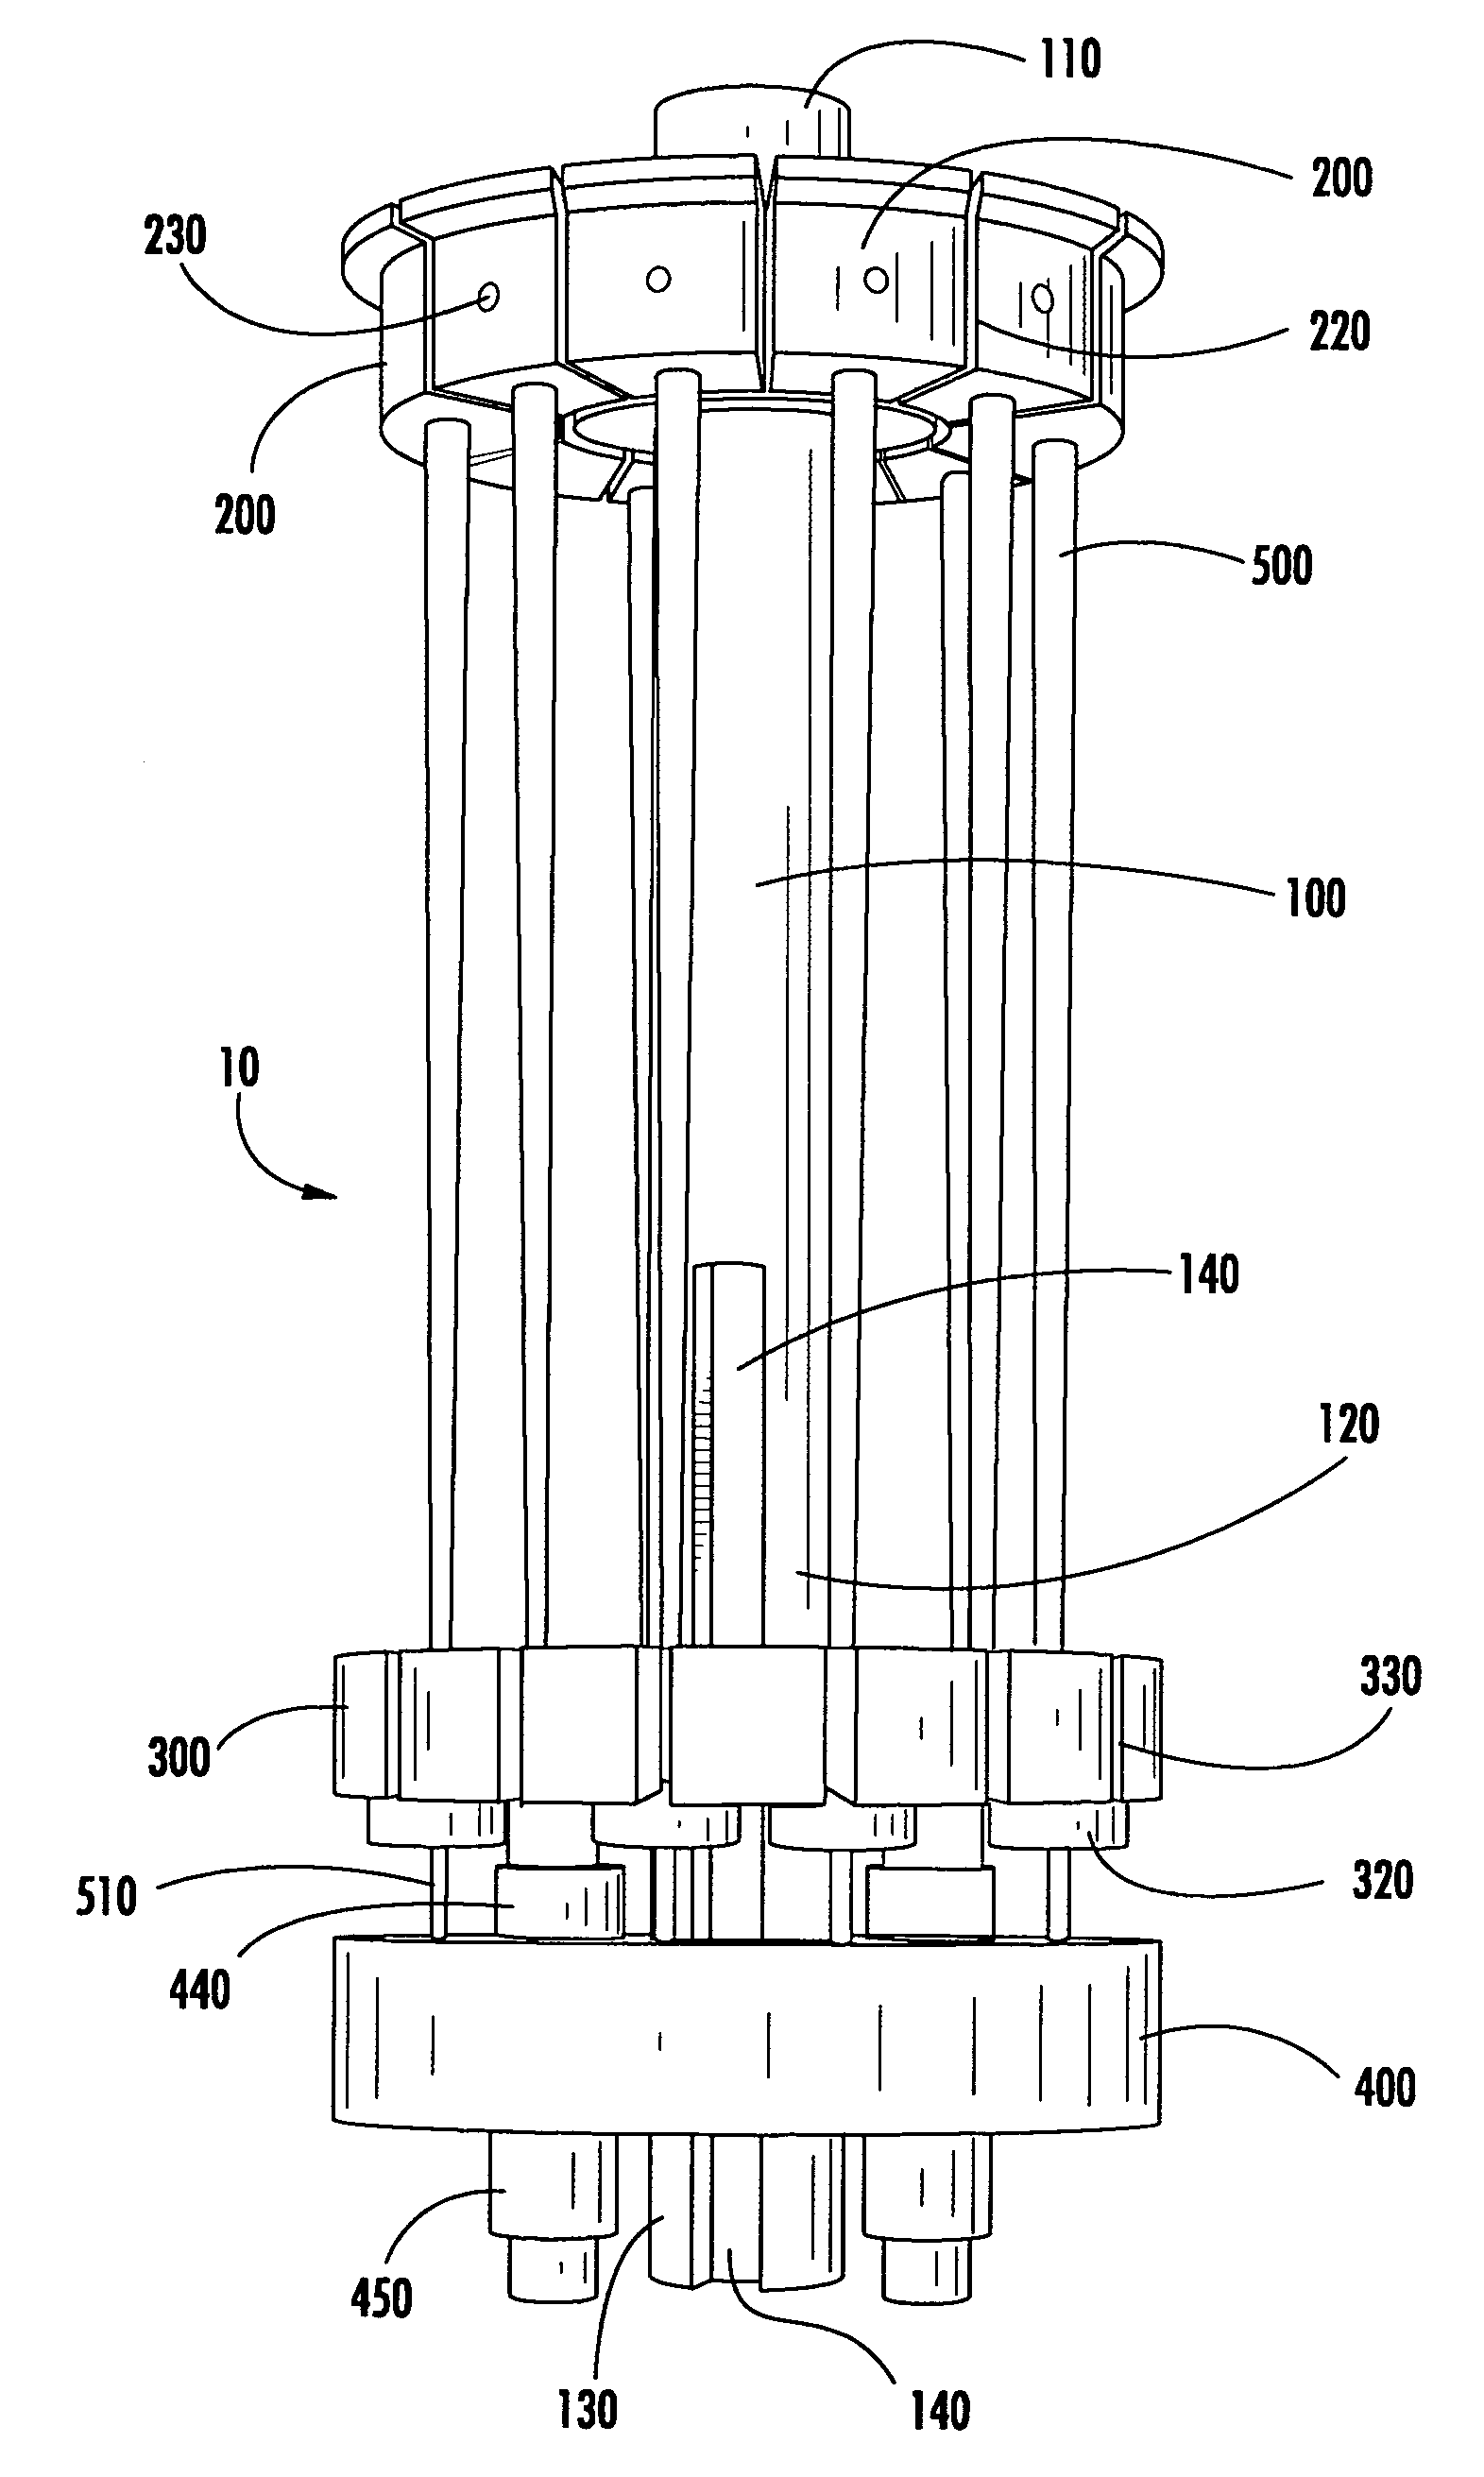 Crystallization cassette for the growth and analysis of macromolecular crystals and an associated method